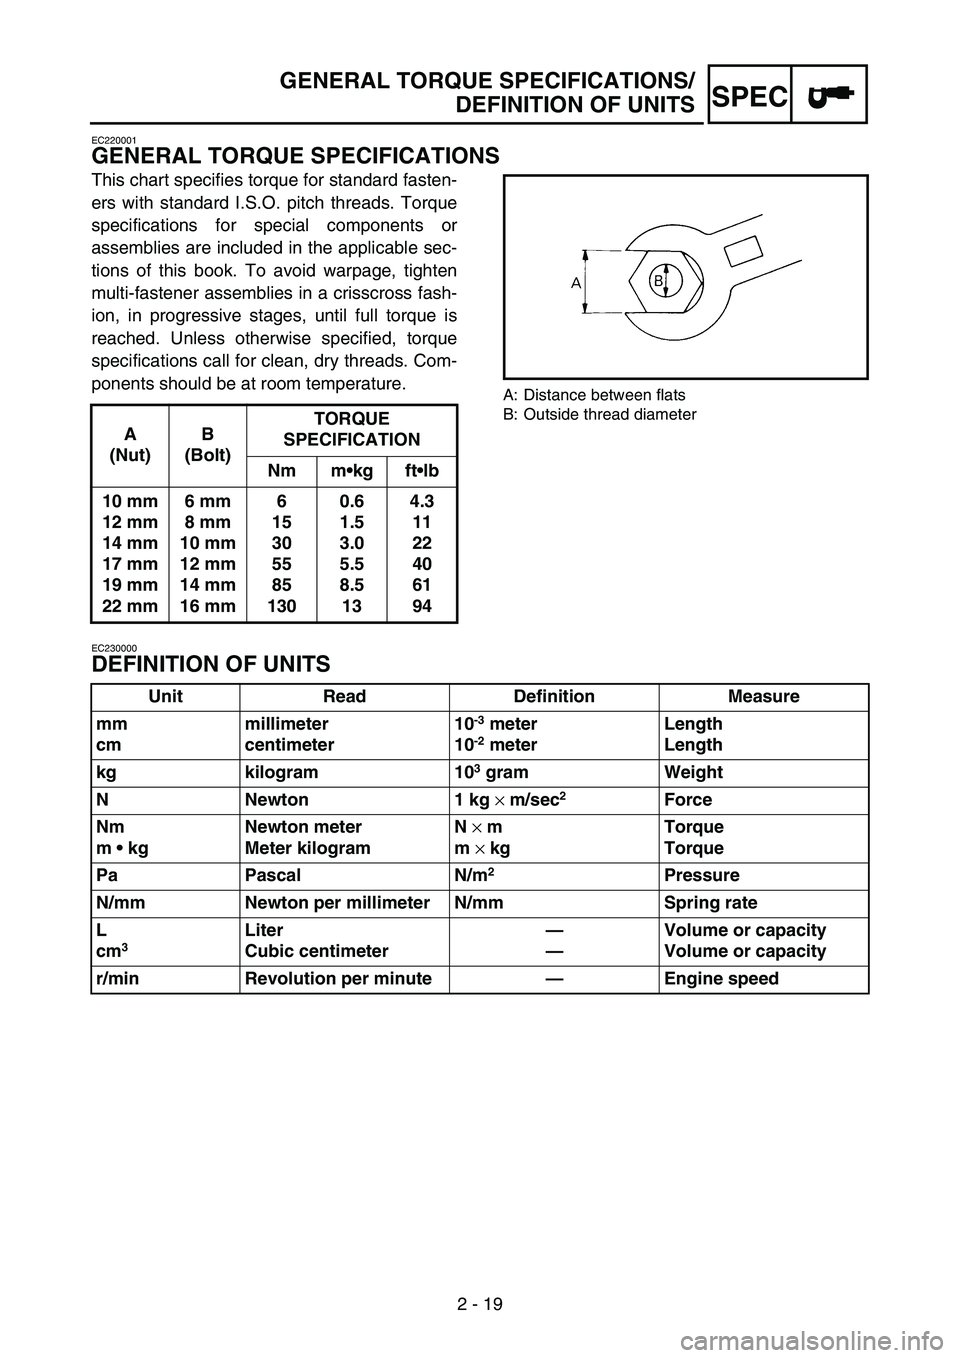 YAMAHA WR 250F 2004  Betriebsanleitungen (in German) 2 - 19
GENERAL TORQUE SPECIFICATIONS/
DEFINITION OF UNITS
SPEC
EC220001
GENERAL TORQUE SPECIFICATIONS
This chart specifies torque for standard fasten-
ers with standard I.S.O. pitch threads. Torque
sp